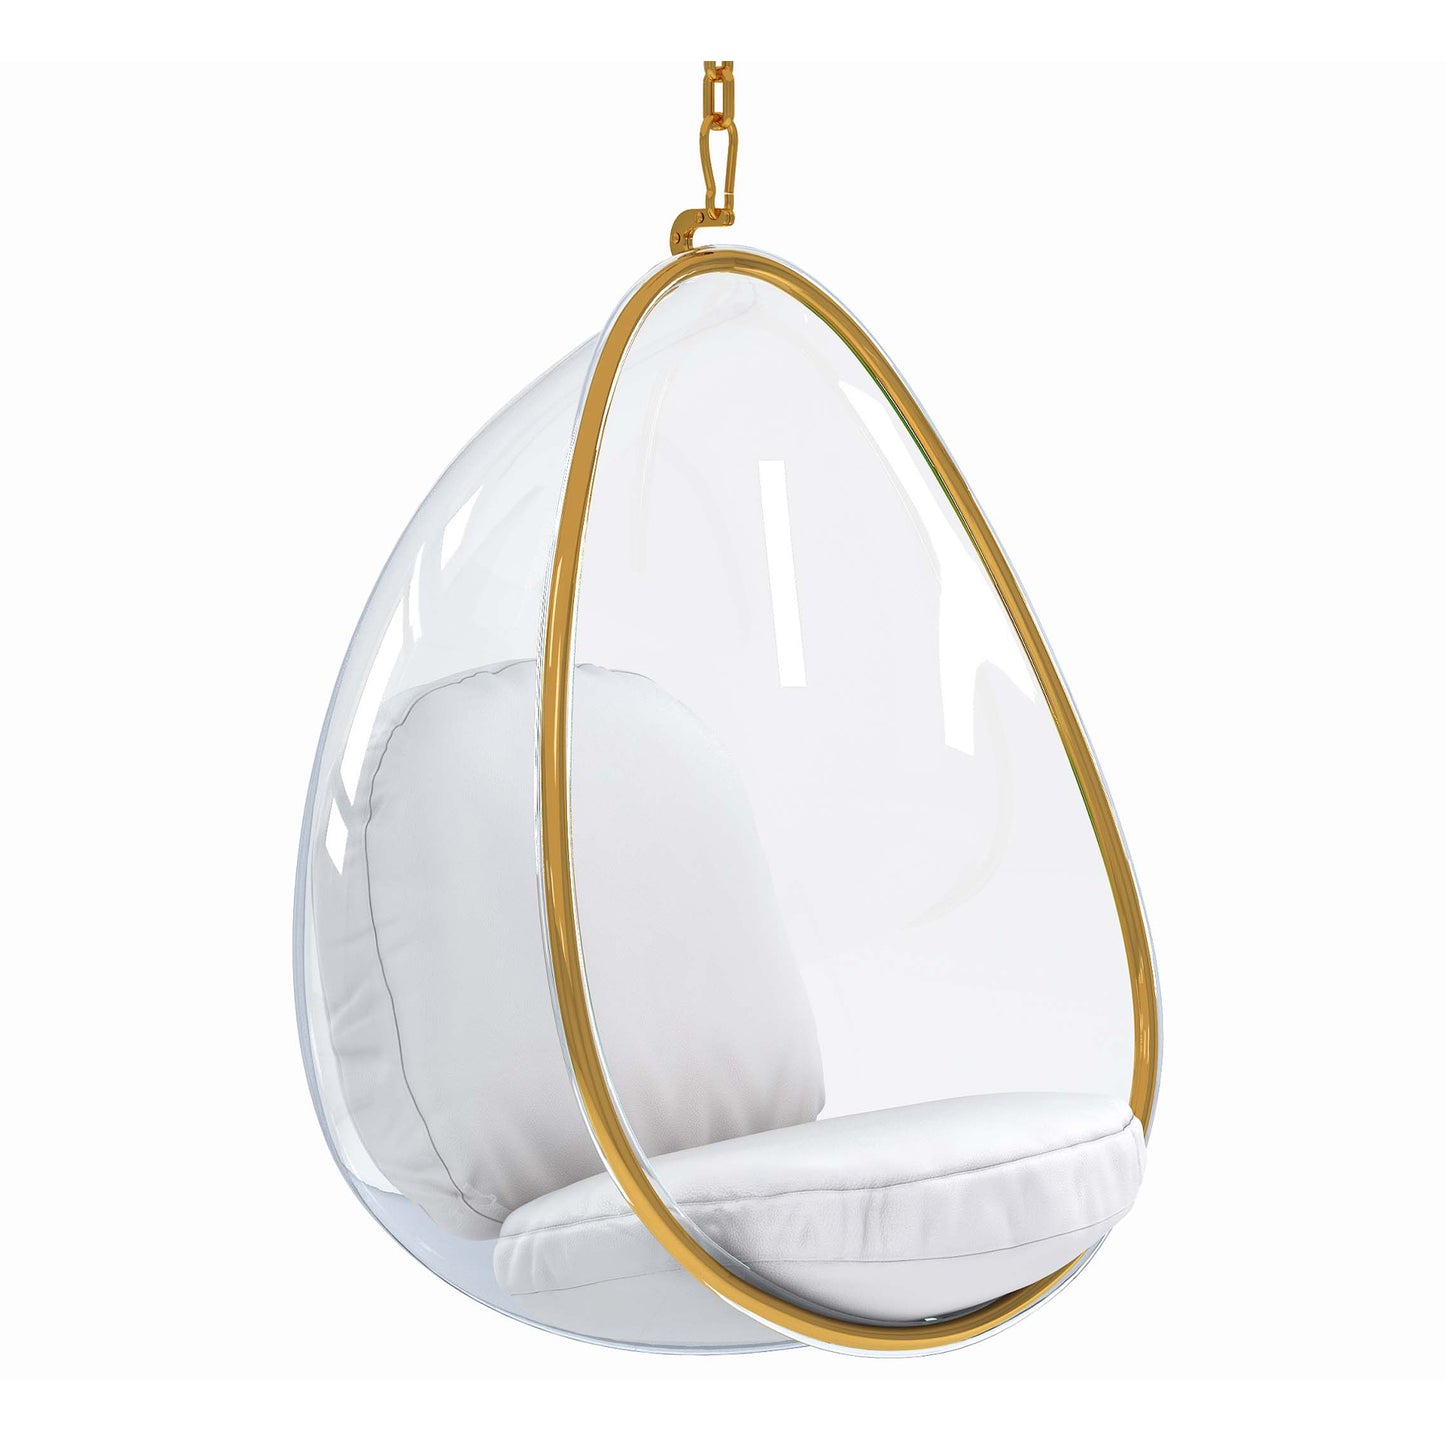 Scoop Hanging Chair - Gold